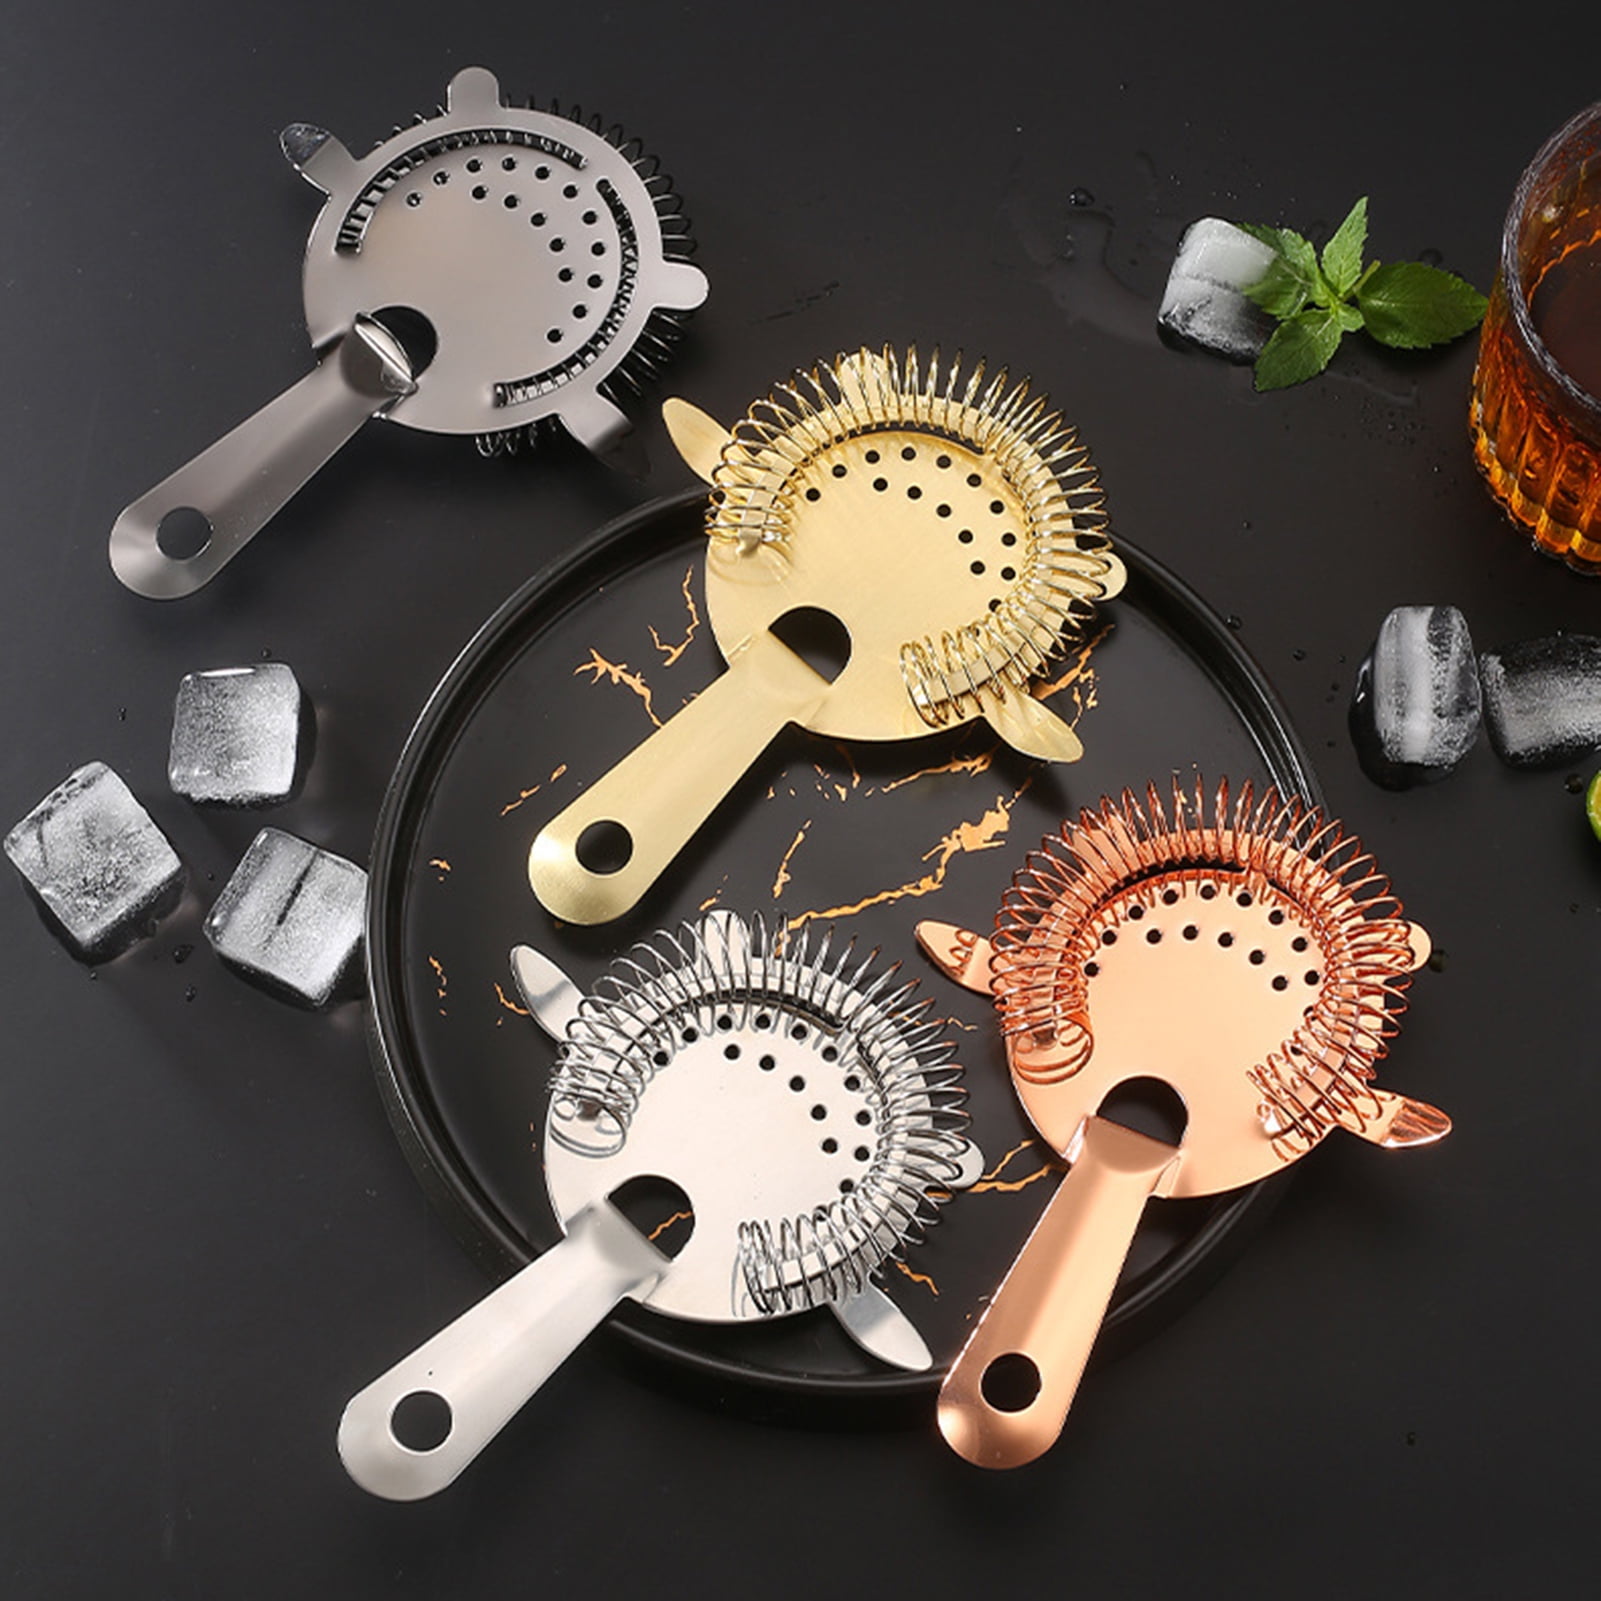 Details about   Bar Strainer Sprung Cocktail Strainer Stainless Steel Deluxe Strainer Bar Tools 